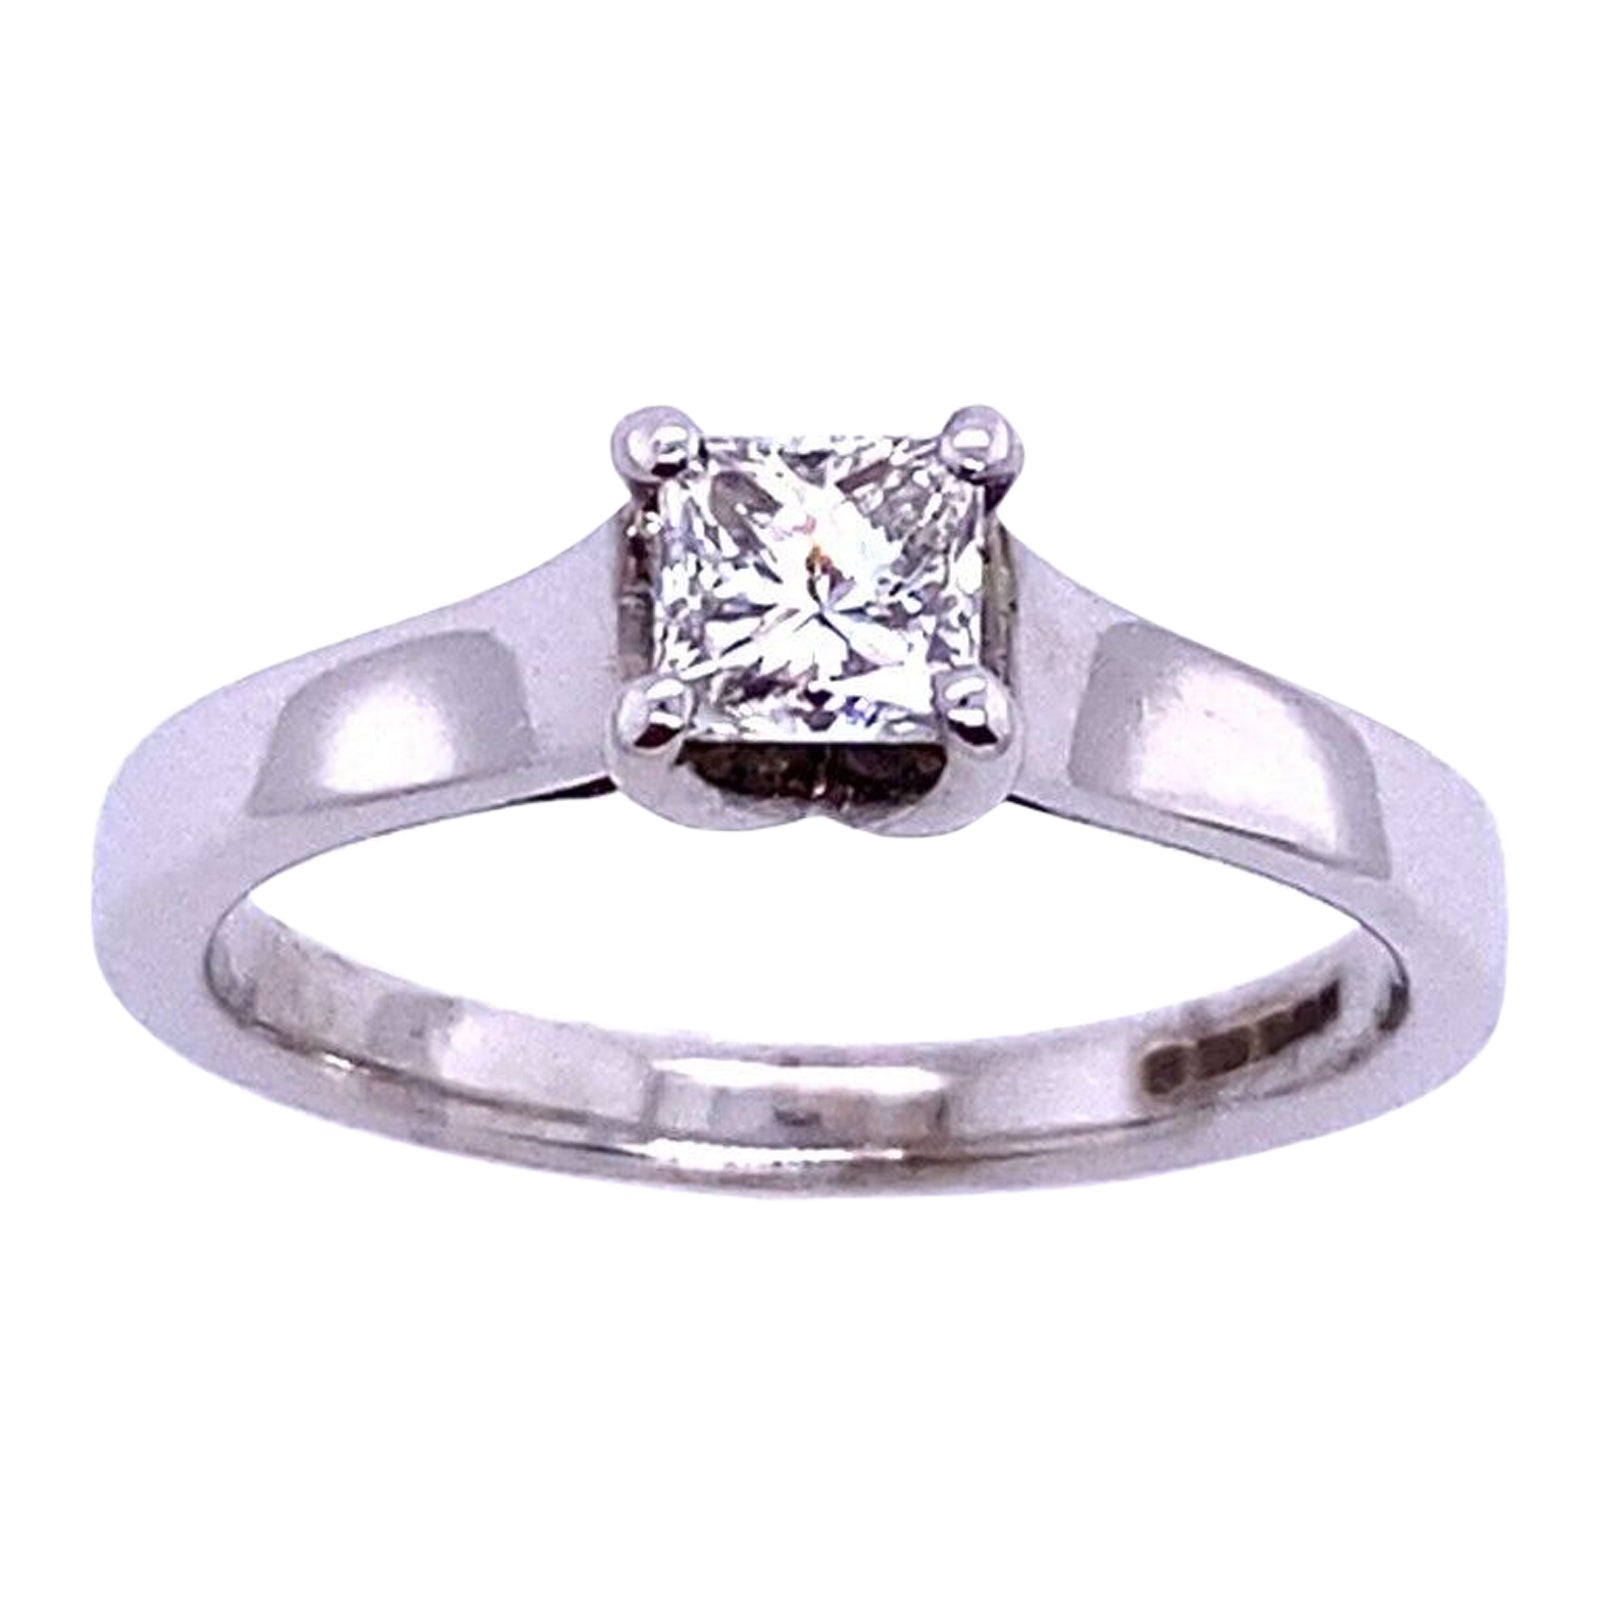 0.35ct G SI1 Princess Cut Diamond Ring in 18ct White Gold For Sale